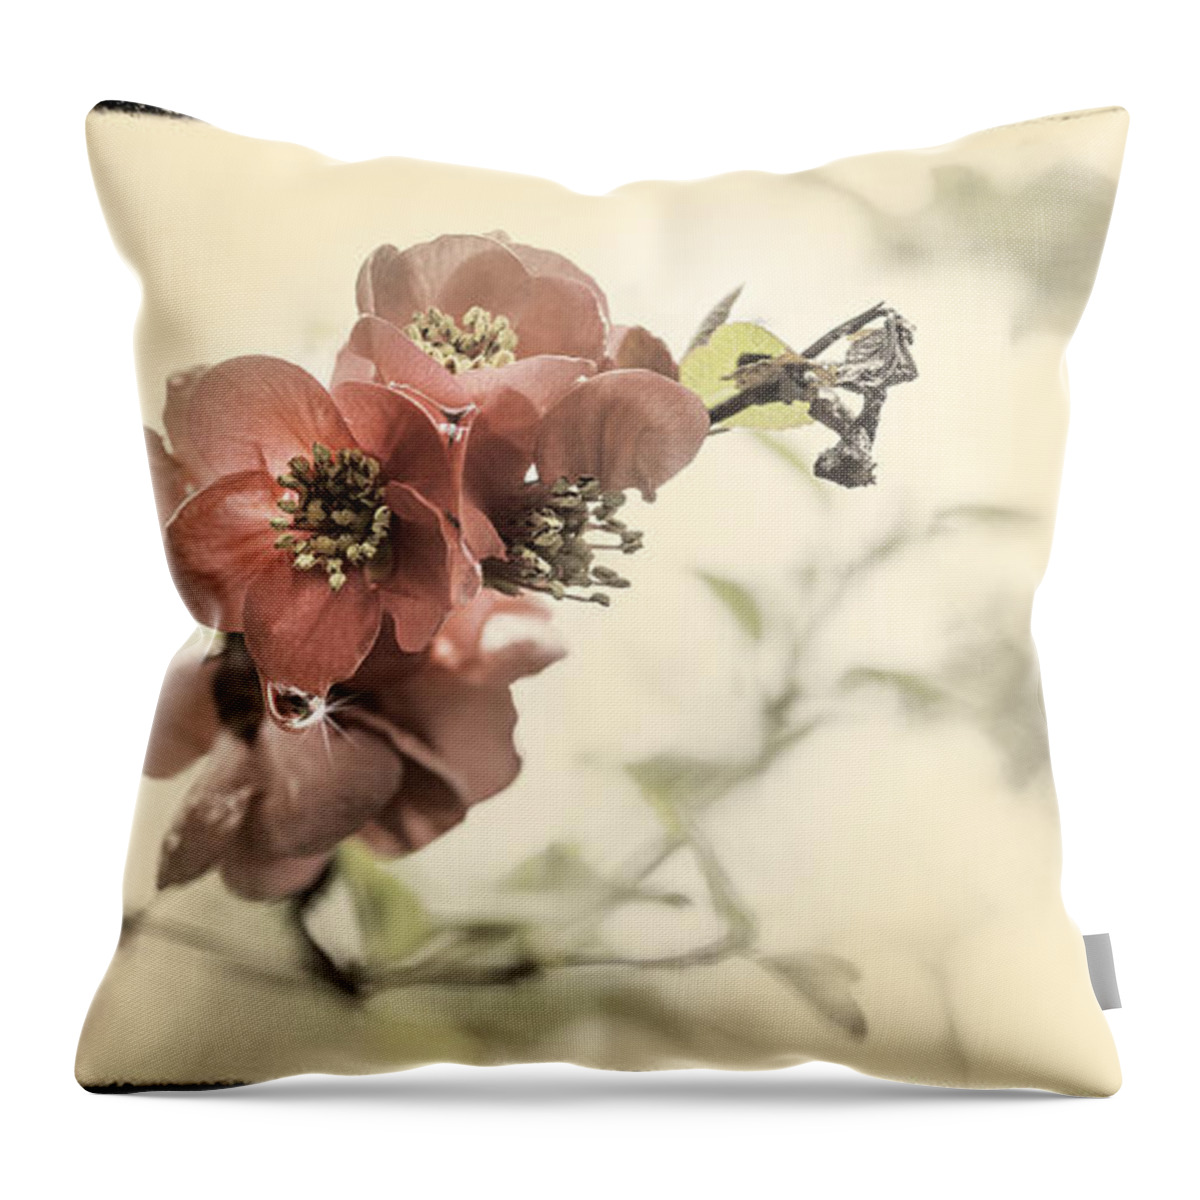 Cherry Blossom Throw Pillow featuring the photograph Cherry Blossoms by Peter V Quenter